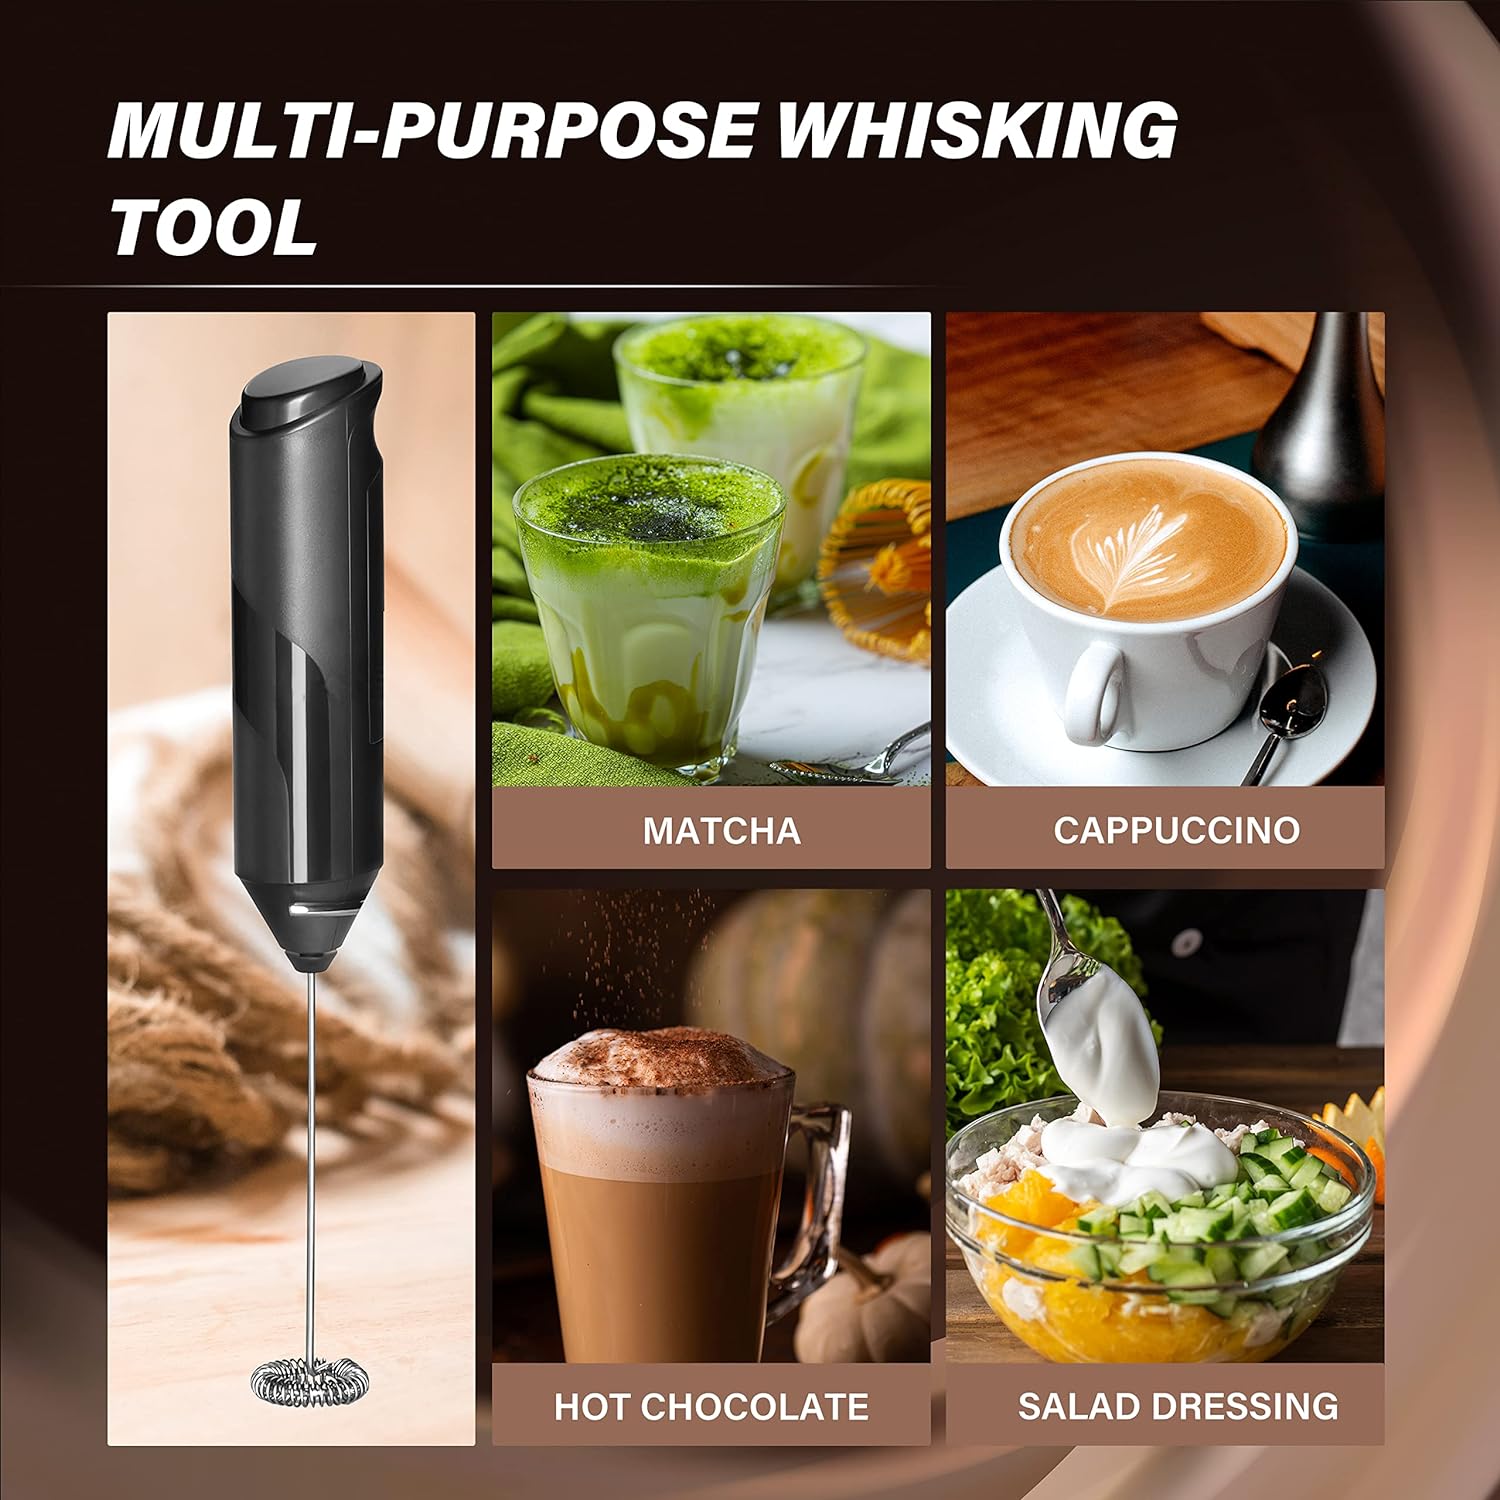 Simple Deluxe Milk Frother Handheld with Stainless Steel Stand Battery Operated Whisk Drink Mixer for Coffee, Frappe, Latte, Matcha, Black Handheld